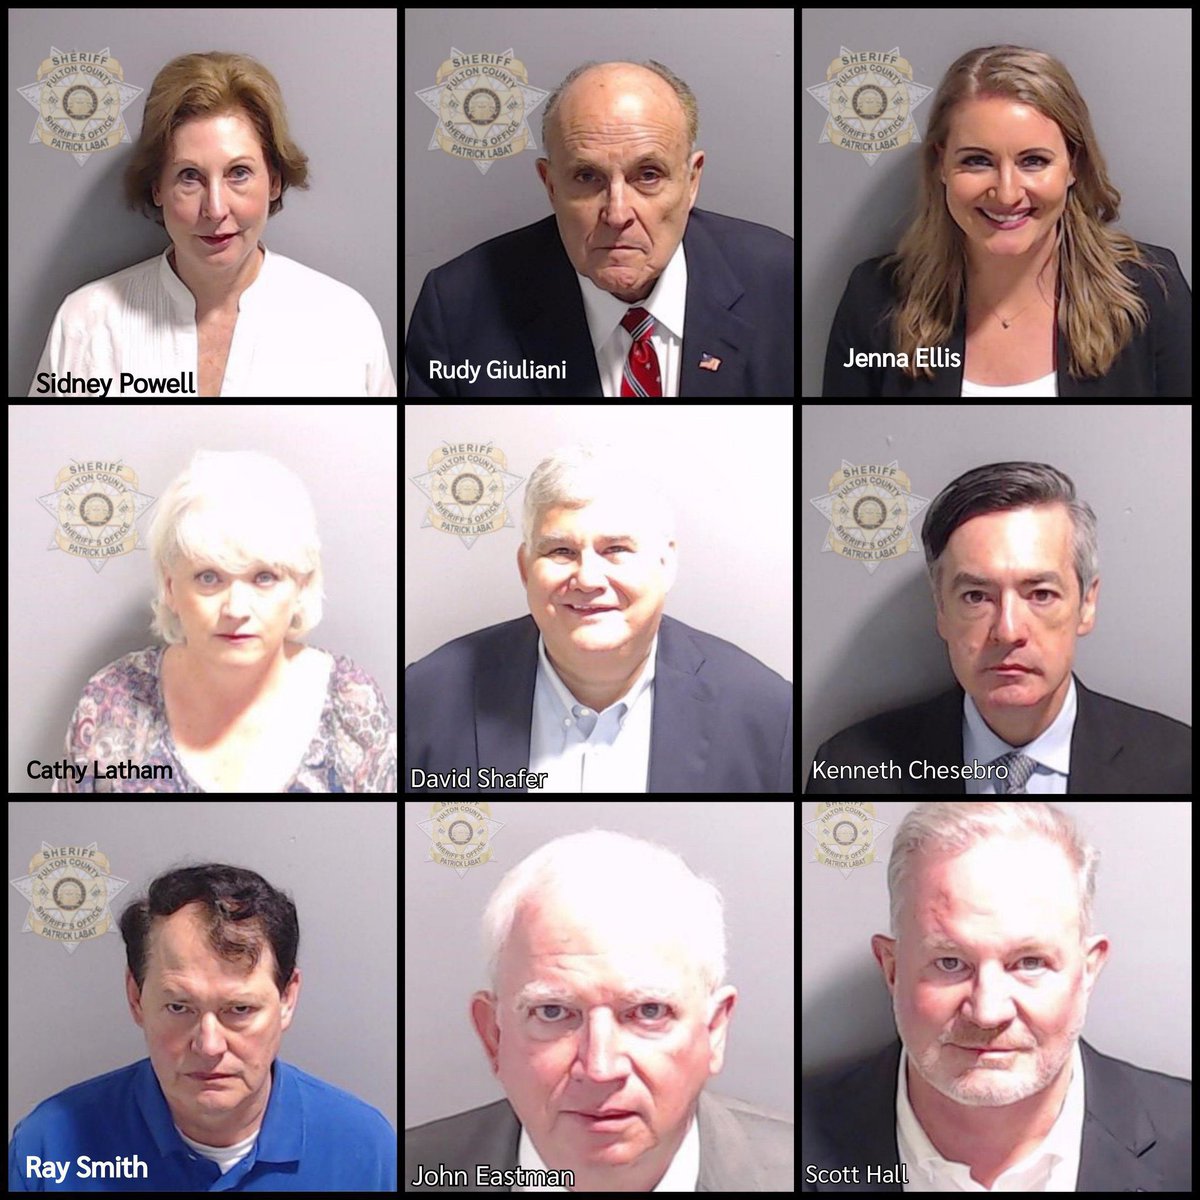 In the criminal justice system, sexually based offenses are considered especially heinous …. Each one of these folks look like the villain in an SVU episode.